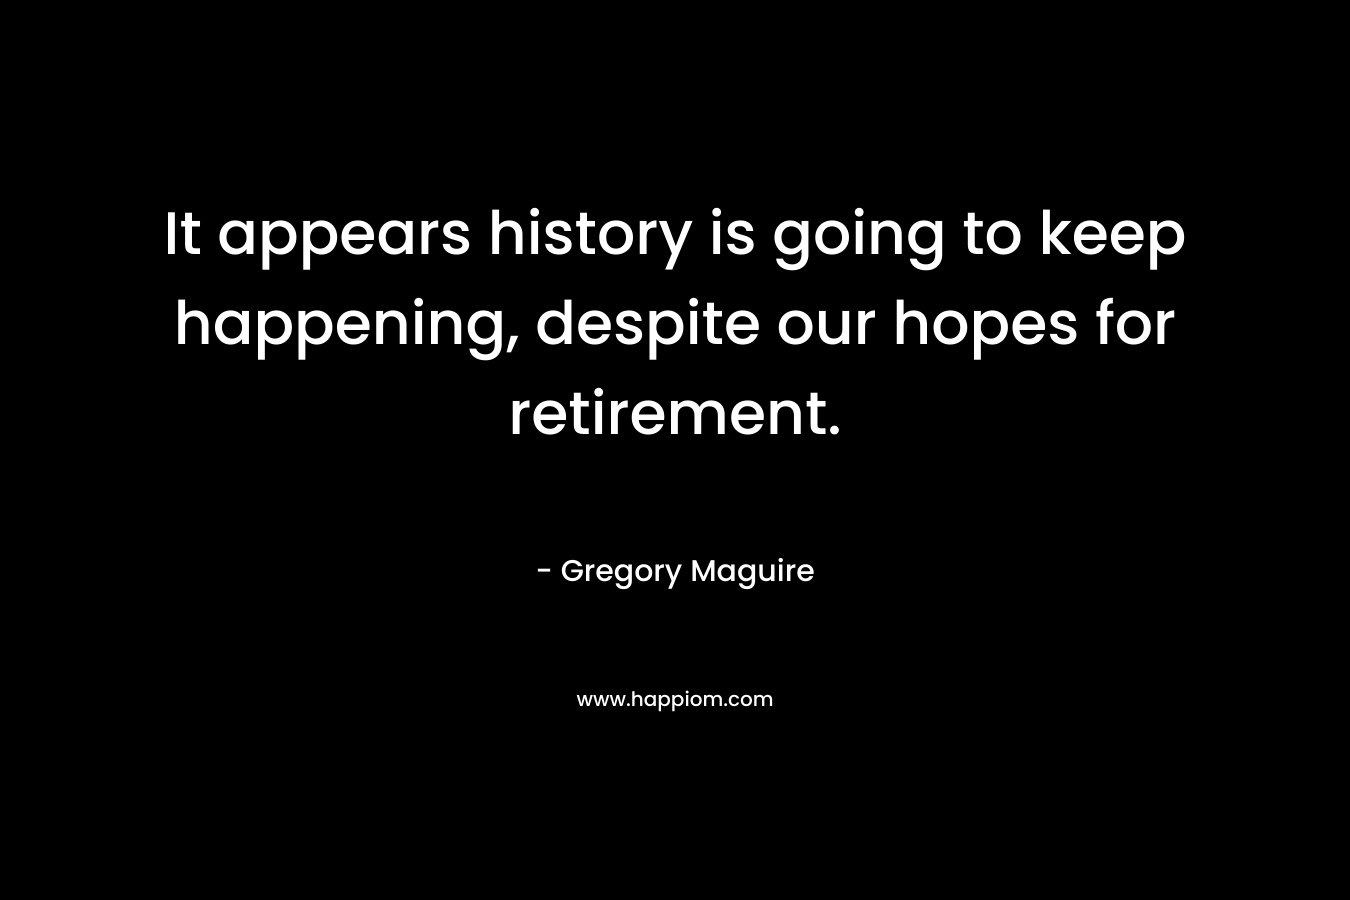 It appears history is going to keep happening, despite our hopes for retirement.